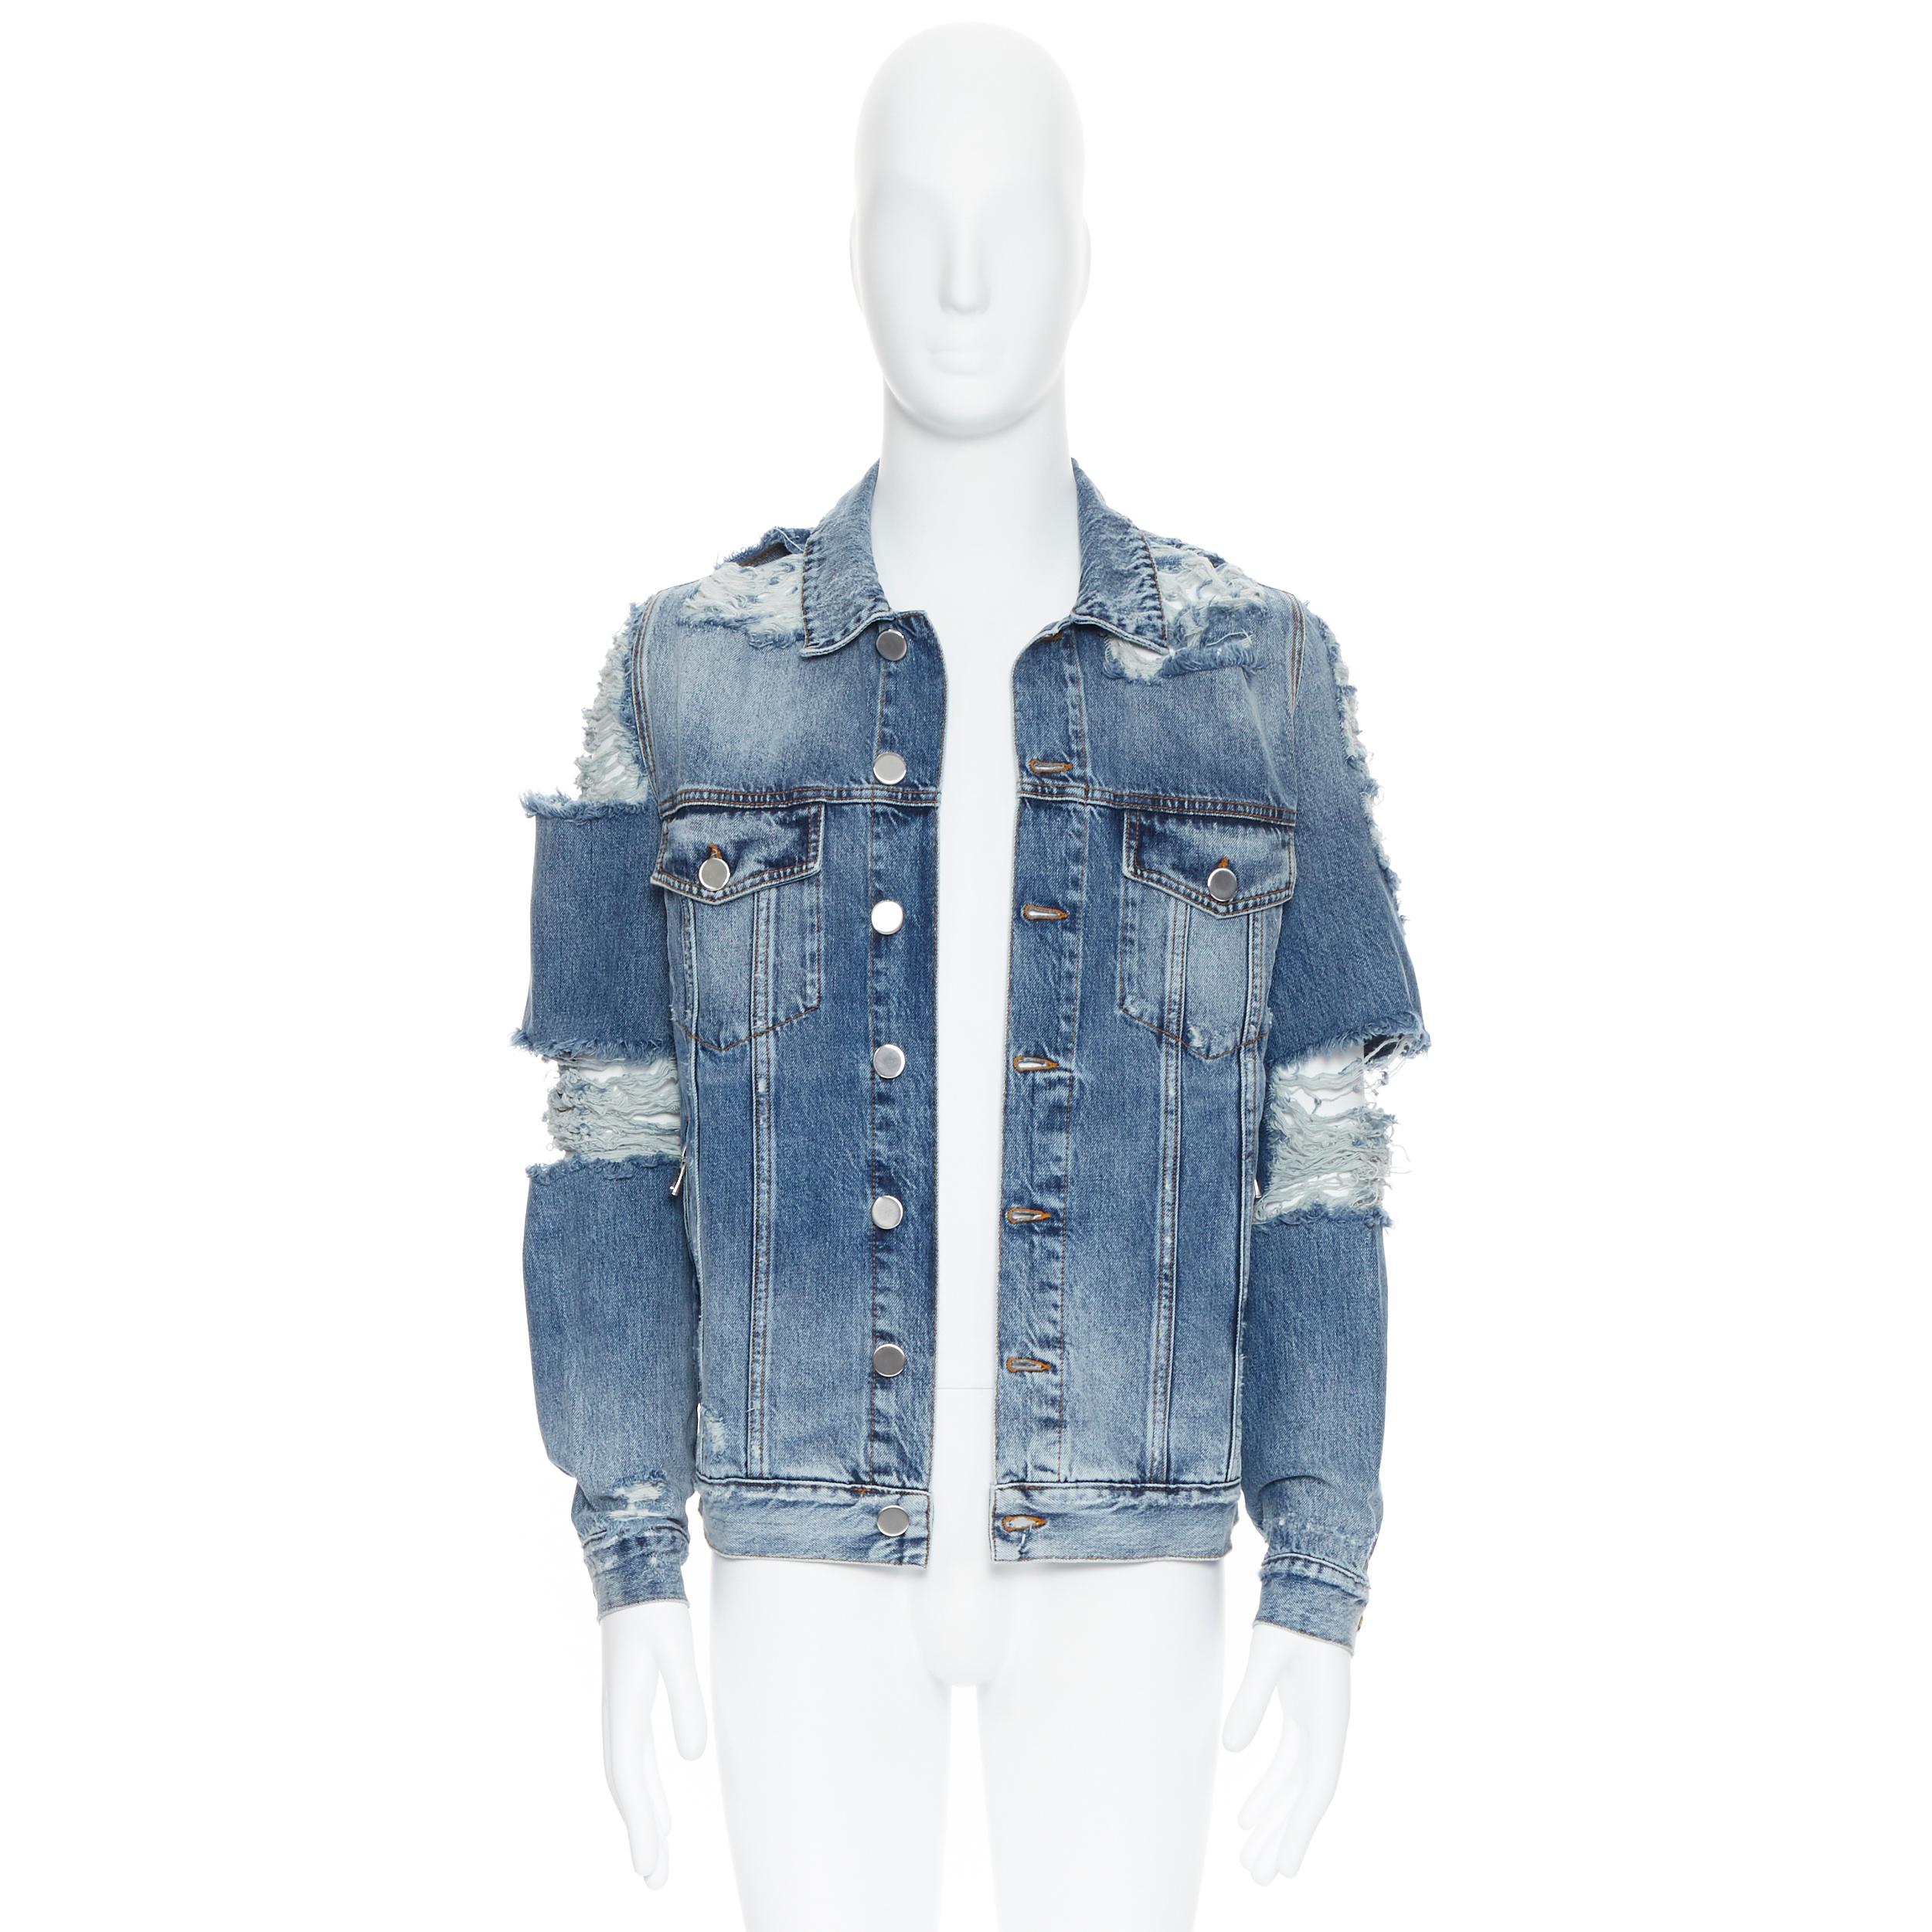 new BALMAIN blue washed heavy distressed holey casual cotton denim jacket S
Brand: Balmain
Designer: Olivier Rousteing
Model Name / Style: Denim jacket
Material: Cotton
Color: Blue
Pattern: Solid
Closure: Button
Extra Detail: BALMAIN style code: